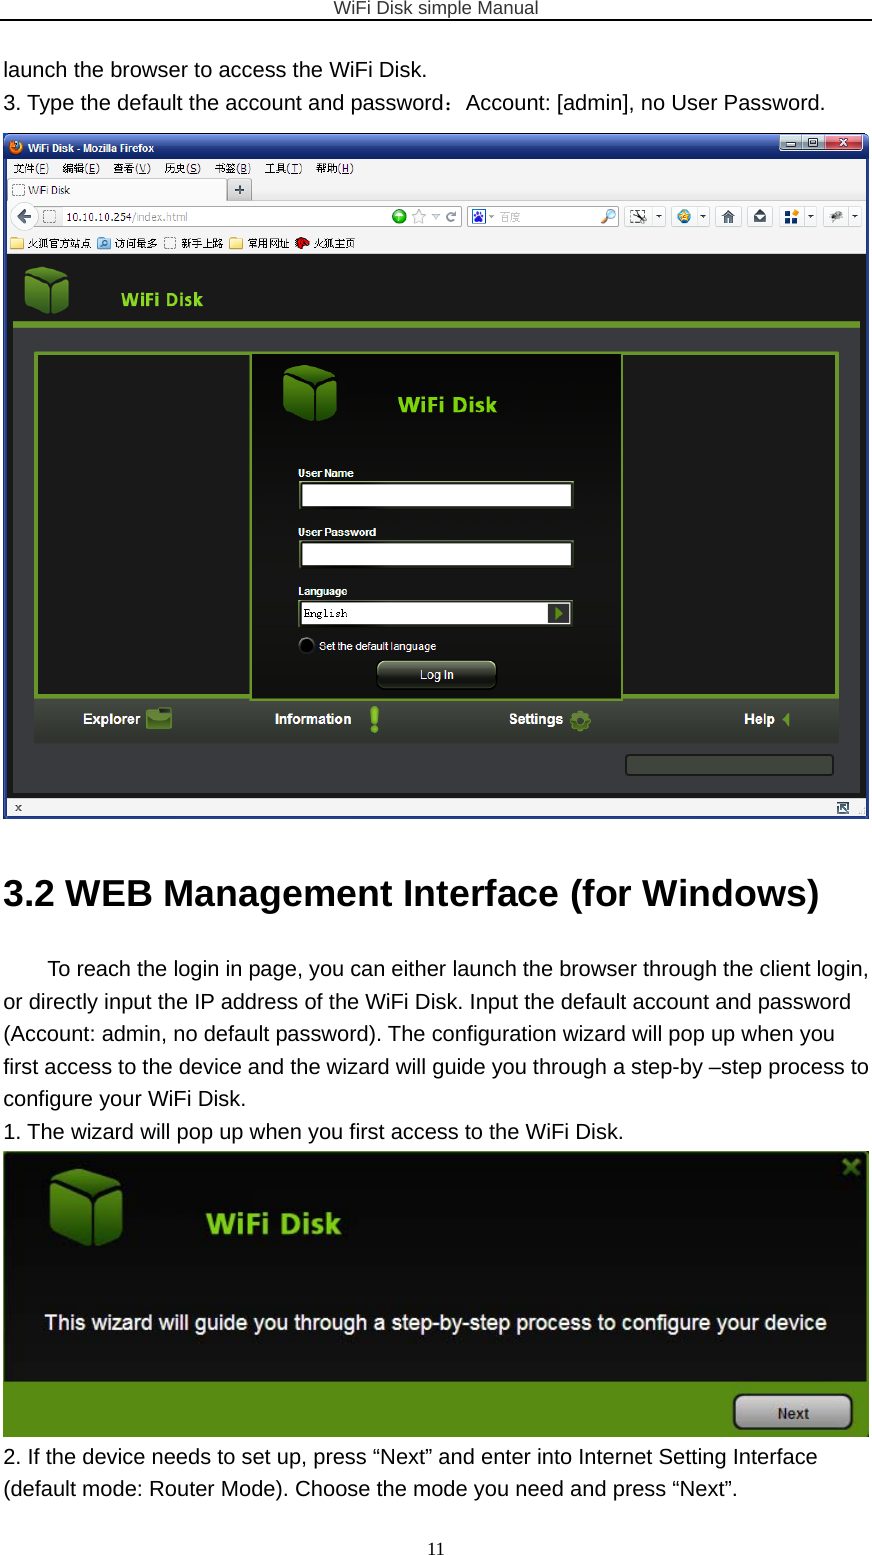 WiFi Disk simple Manual  11launch the browser to access the WiFi Disk. 3. Type the default the account and password：Account: [admin], no User Password.  3.2 WEB Management Interface (for Windows) To reach the login in page, you can either launch the browser through the client login, or directly input the IP address of the WiFi Disk. Input the default account and password (Account: admin, no default password). The configuration wizard will pop up when you first access to the device and the wizard will guide you through a step-by –step process to configure your WiFi Disk. 1. The wizard will pop up when you first access to the WiFi Disk.  2. If the device needs to set up, press “Next” and enter into Internet Setting Interface (default mode: Router Mode). Choose the mode you need and press “Next”. 